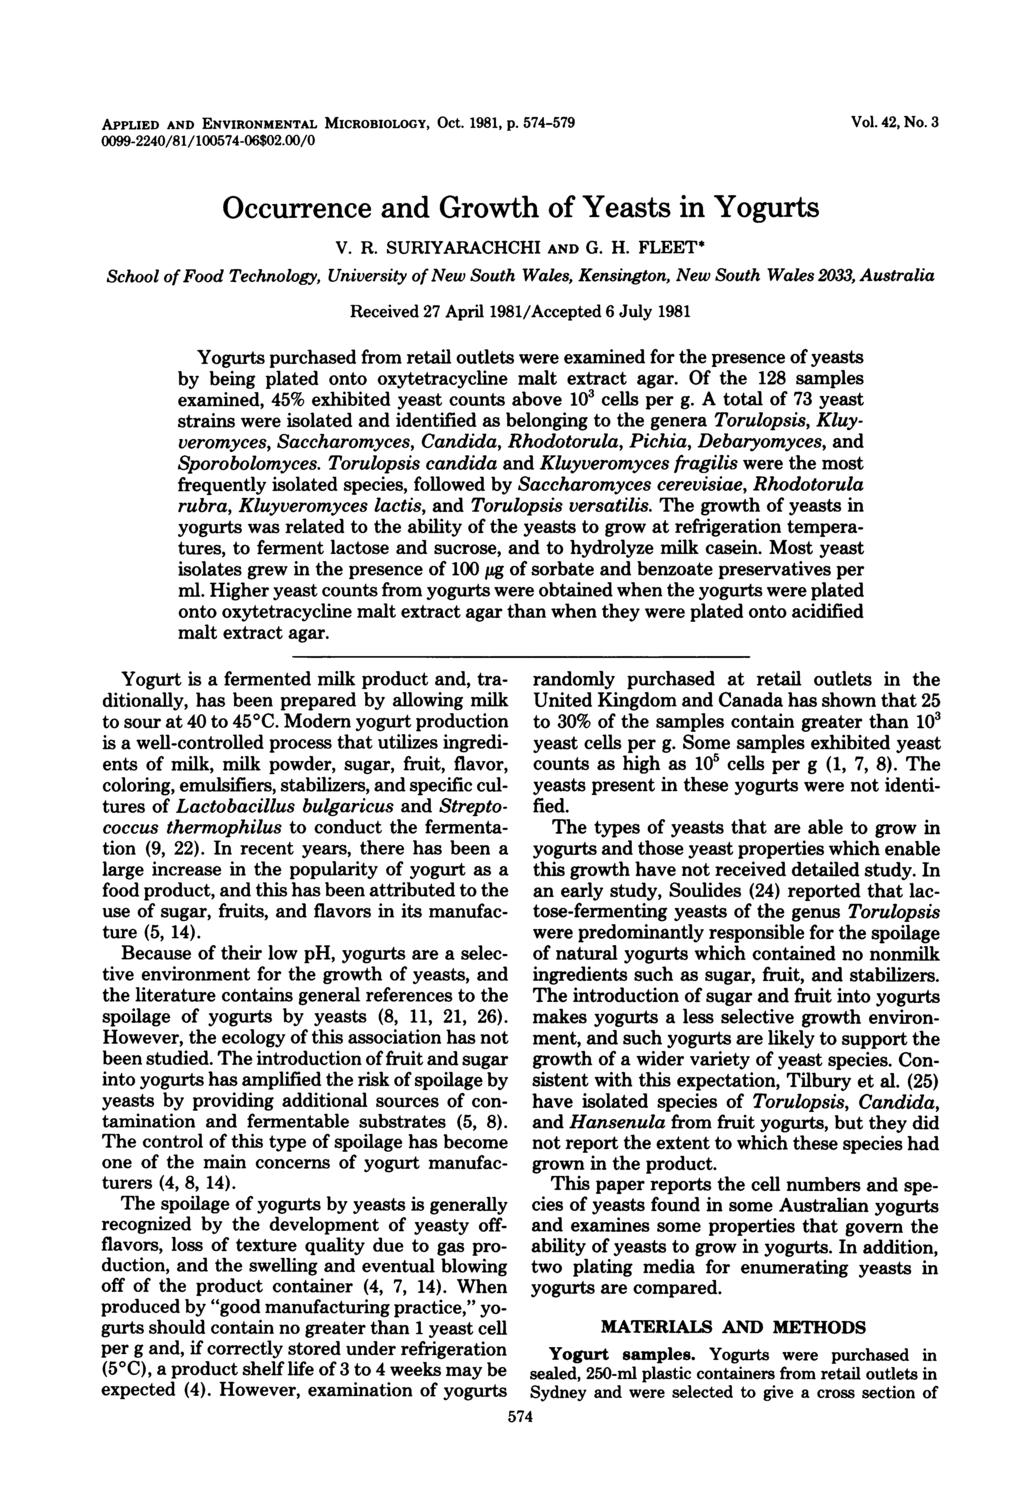 APPLIED AND ENVIRONMENTAL MICROBIOLOGY, Oct. 1981, p. 574-579 0099-2240/81/100574-06$02.00/0 Vol. 42, No. 3 Occurrence and Growth of Yeasts in Yogurts V. R. SURIYARACHCHI AND G. H.